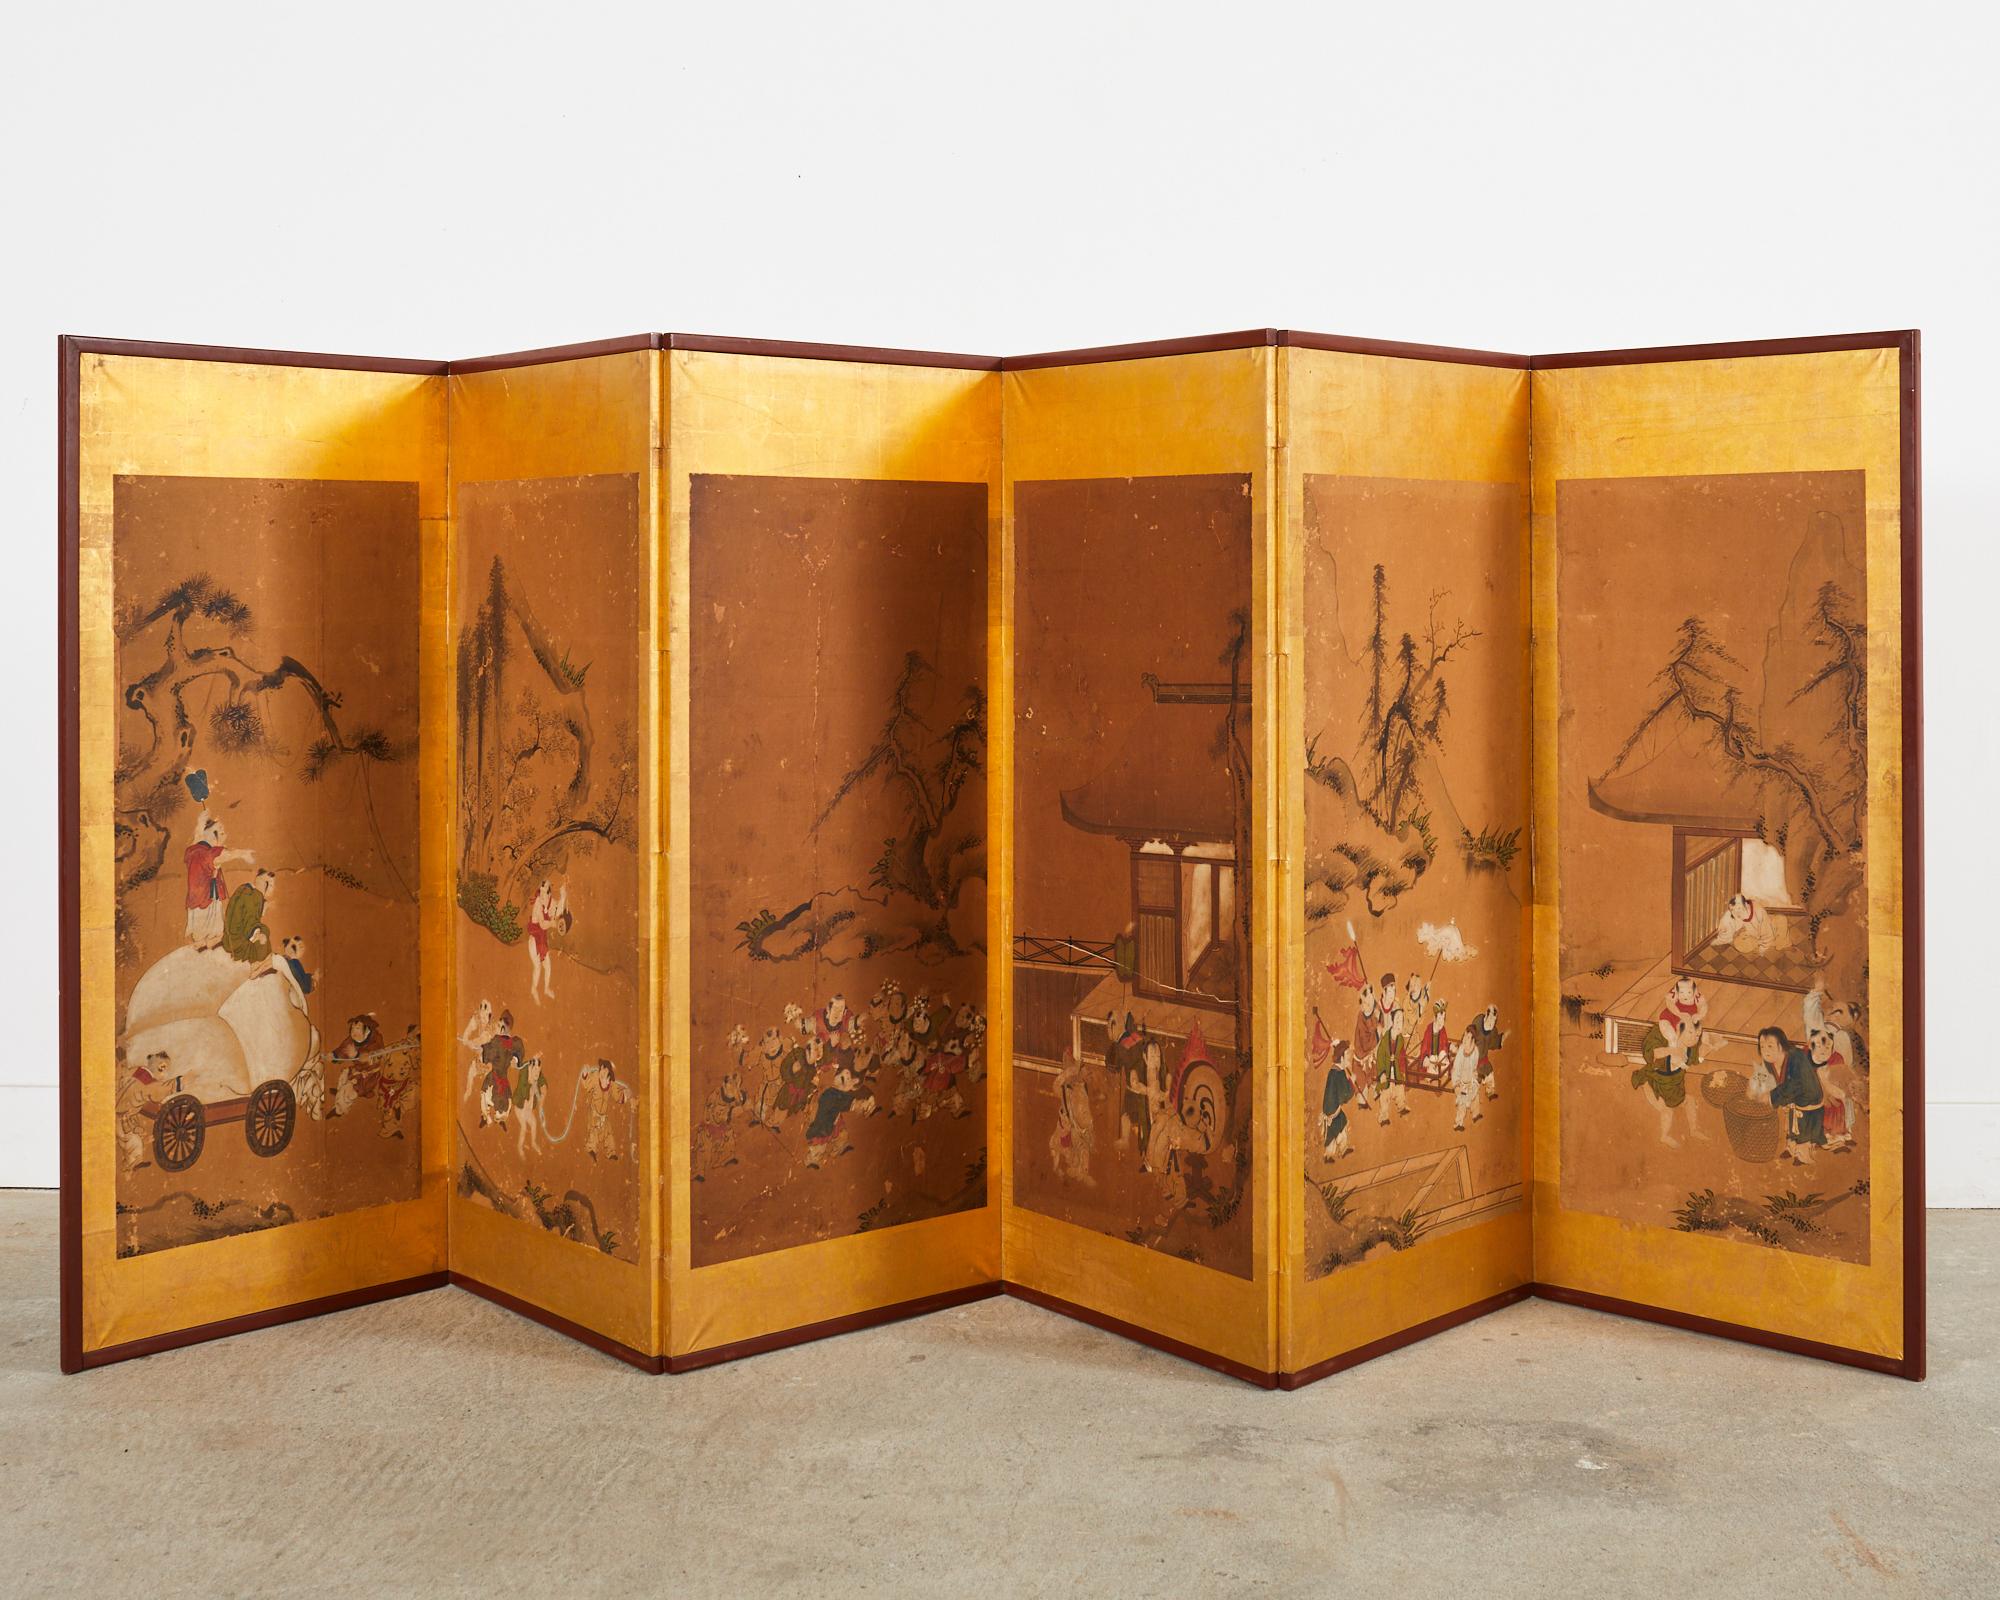 Amazing 19th century Japanese Edo period six panel folding byobu screen depicting Chinese children at play. The screen alludes to the 100 children theme. The paintings are set in a lacquer painted faded red frame with dramatic gold leaf borders. The